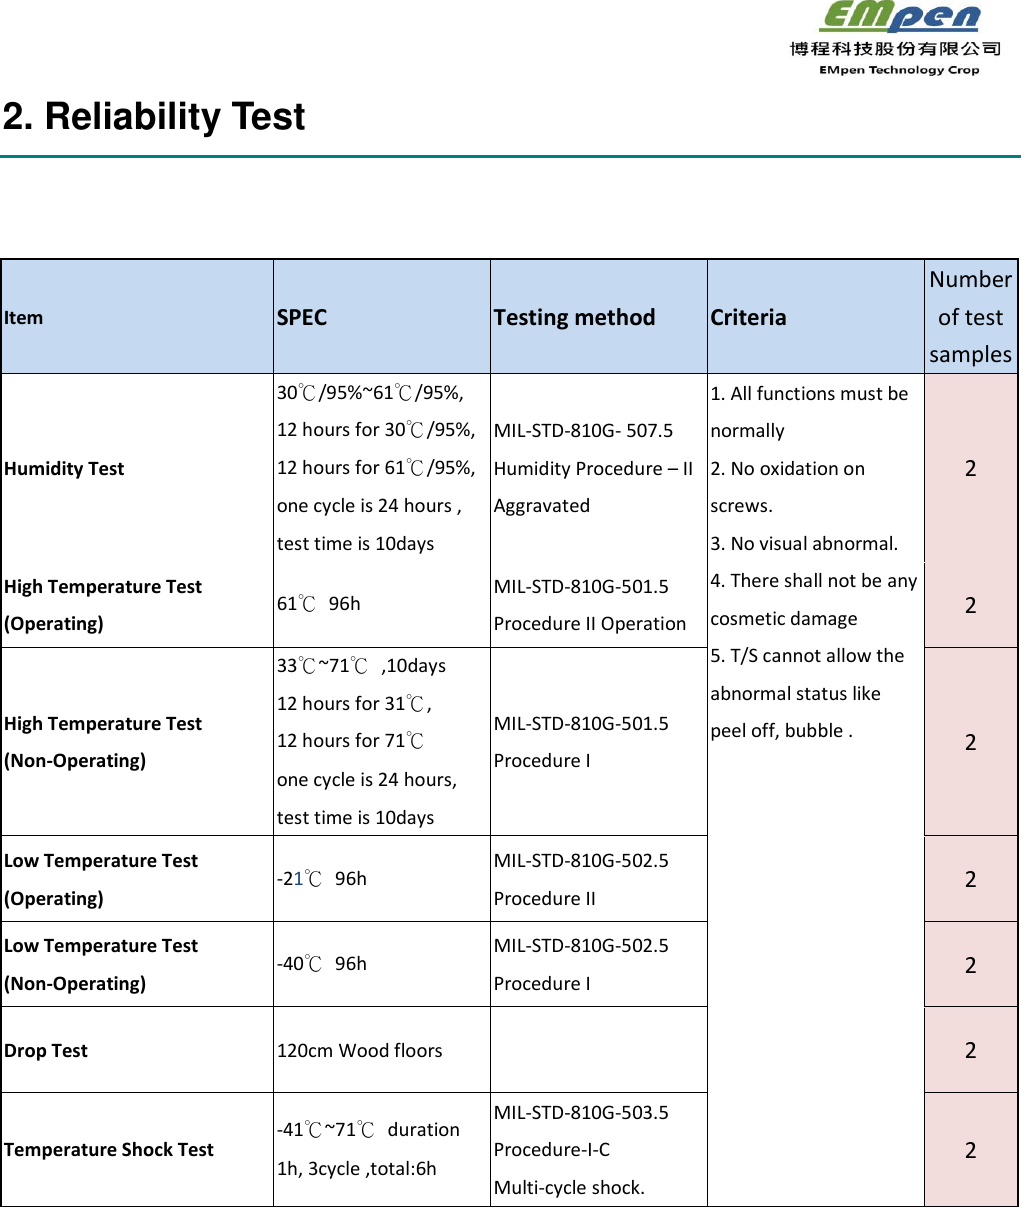                                                                 2. Reliability Test   Item SPEC Testing method Criteria Number of test samples Humidity Test 30℃/95%~61℃/95%, 12 hours for 30℃/95%,   12 hours for 61℃/95%, one cycle is 24 hours , test time is 10days MIL-STD-810G- 507.5 Humidity Procedure – II Aggravated 1. All functions must be normally 2. No oxidation on screws. 3. No visual abnormal. 4. There shall not be any cosmetic damage   5. T/S cannot allow the abnormal status like peel off, bubble . 2 High Temperature Test (Operating) 61℃  96h MIL-STD-810G-501.5 Procedure II Operation 2 High Temperature Test (Non-Operating) 33℃~71℃  ,10days 12 hours for 31℃,   12 hours for 71℃ one cycle is 24 hours,     test time is 10days MIL-STD-810G-501.5 Procedure I 2 Low Temperature Test (Operating) -21℃  96h   MIL-STD-810G-502.5 Procedure II 2 Low Temperature Test (Non-Operating) -40℃  96h   MIL-STD-810G-502.5 Procedure I 2 Drop Test 120cm Wood floors  2 Temperature Shock Test -41℃~71℃  duration 1h, 3cycle ,total:6h MIL-STD-810G-503.5   Procedure-I-C Multi-cycle shock. 2   